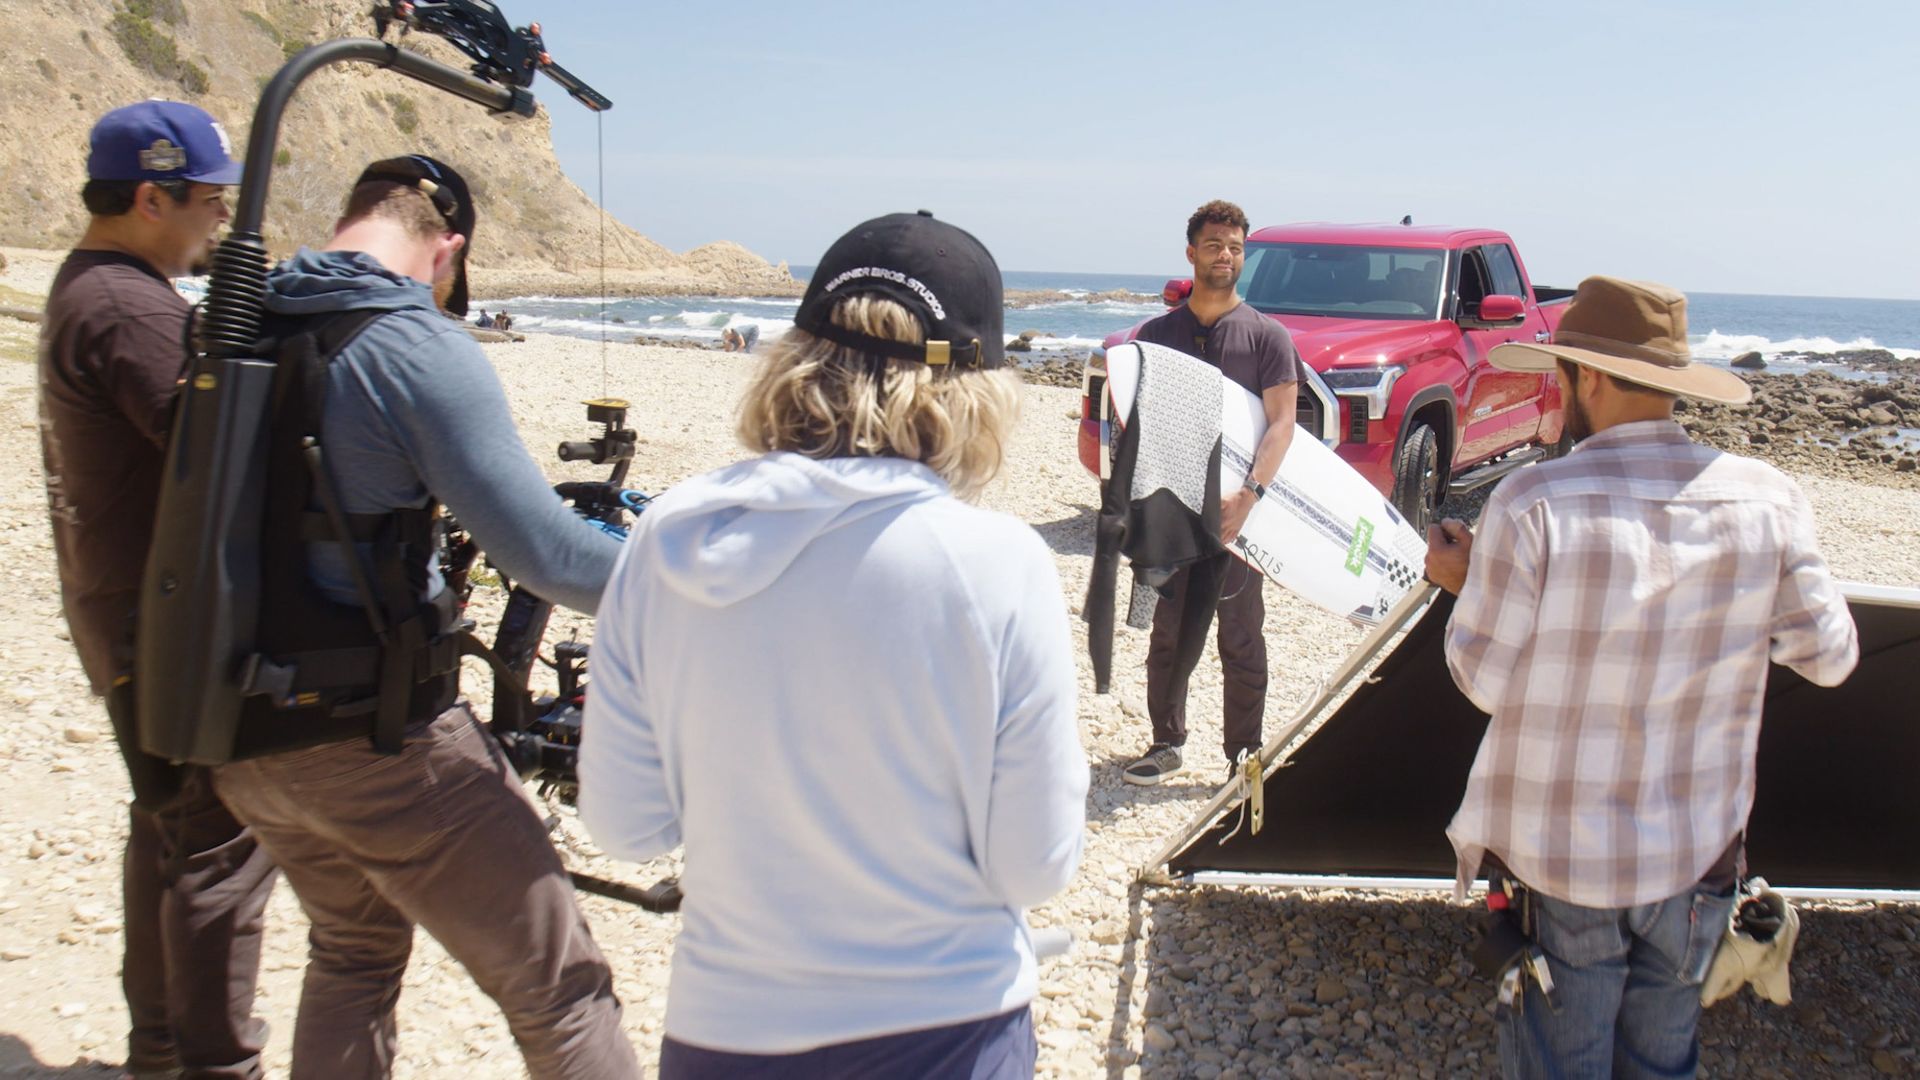 A group of people are standing on a beach with a red truck in the background.